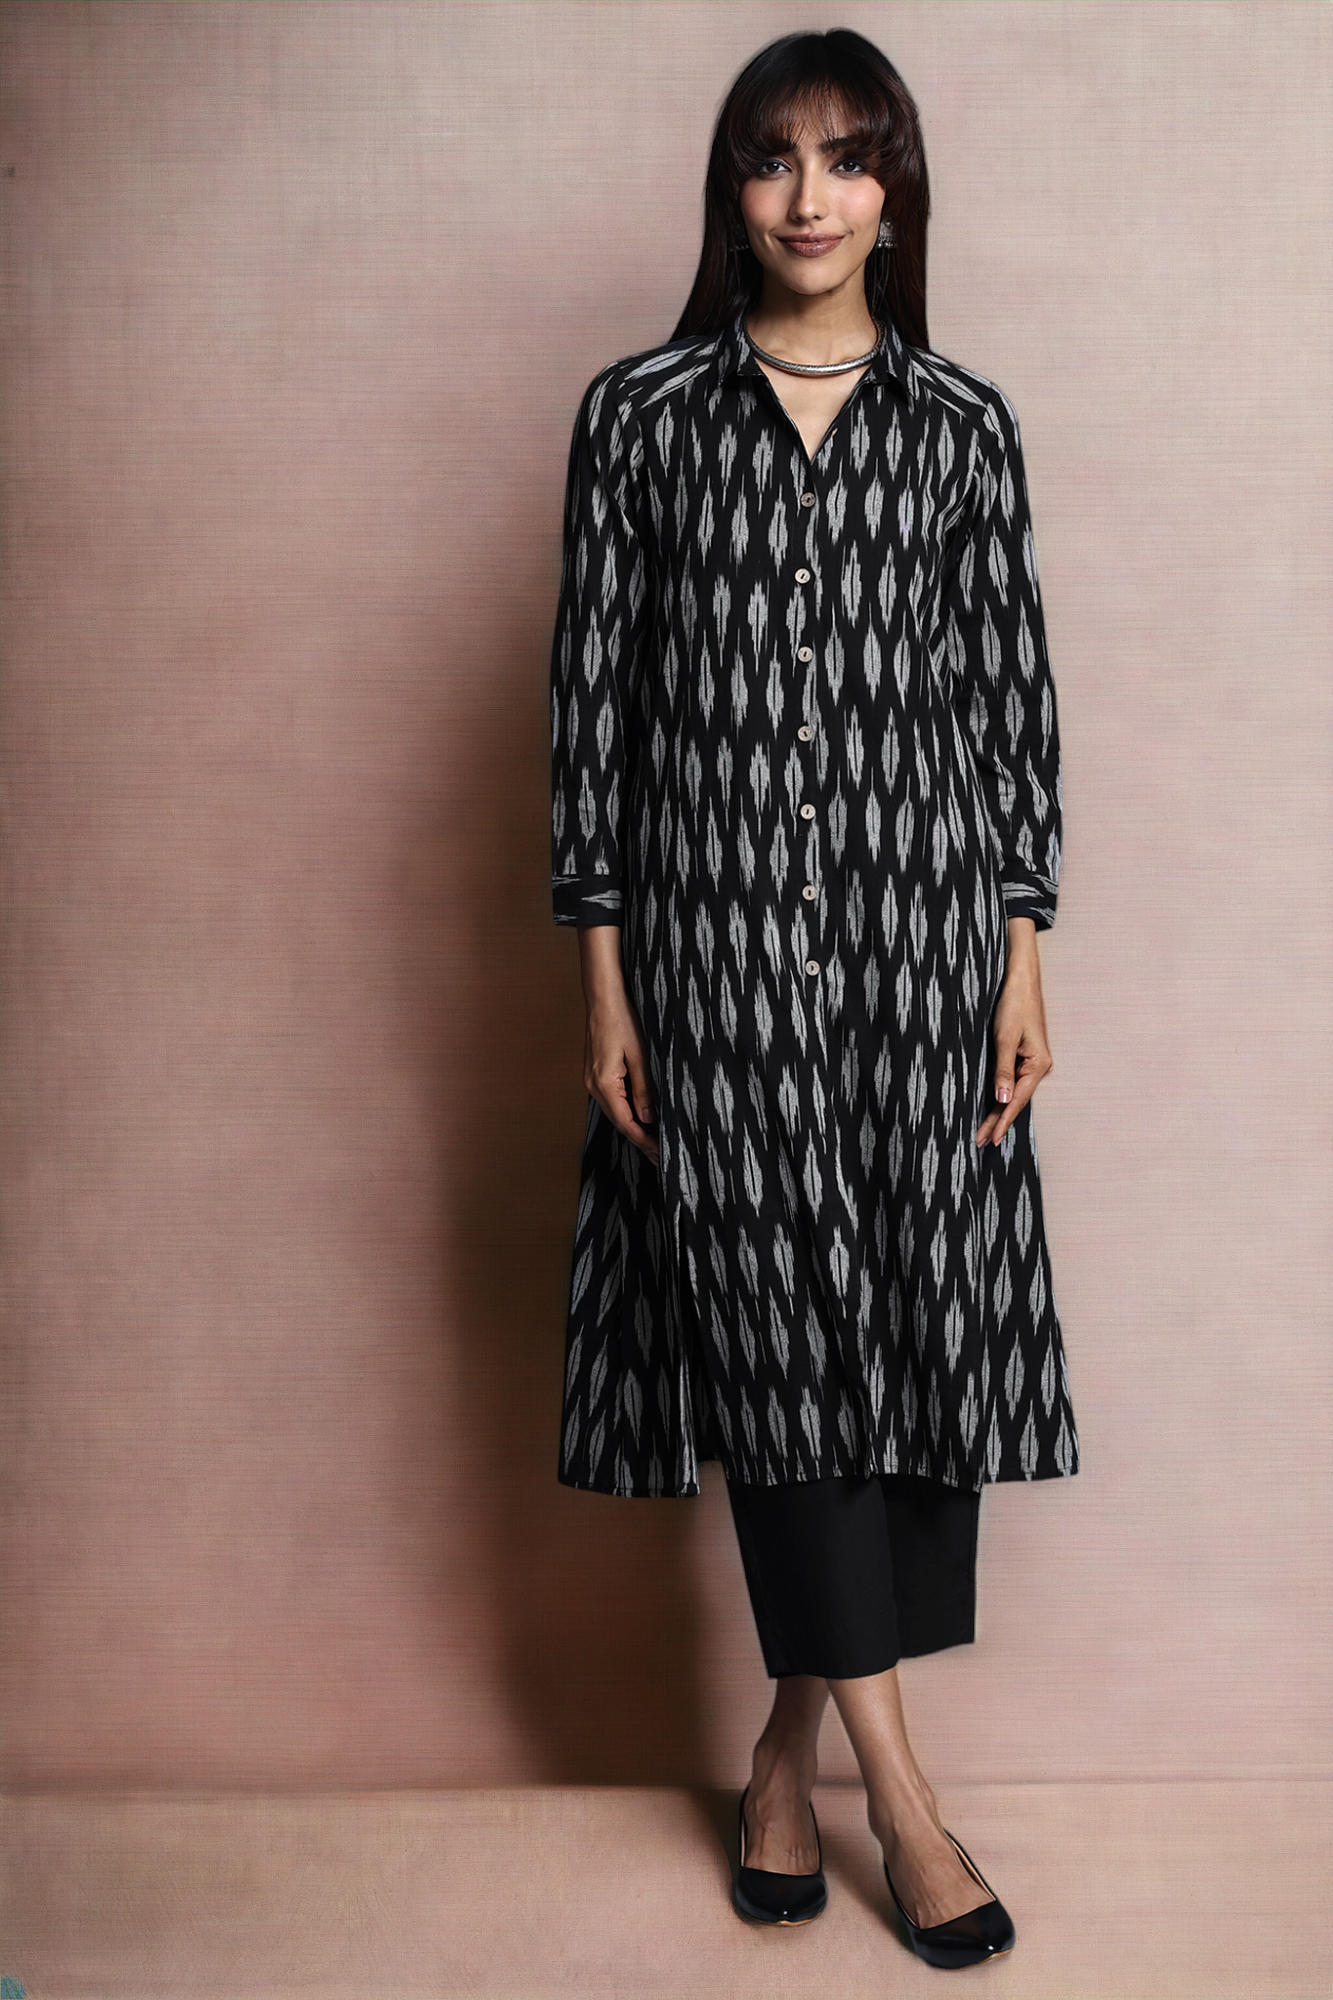 long shirt dress with front buttons - obsidian silver & constellations